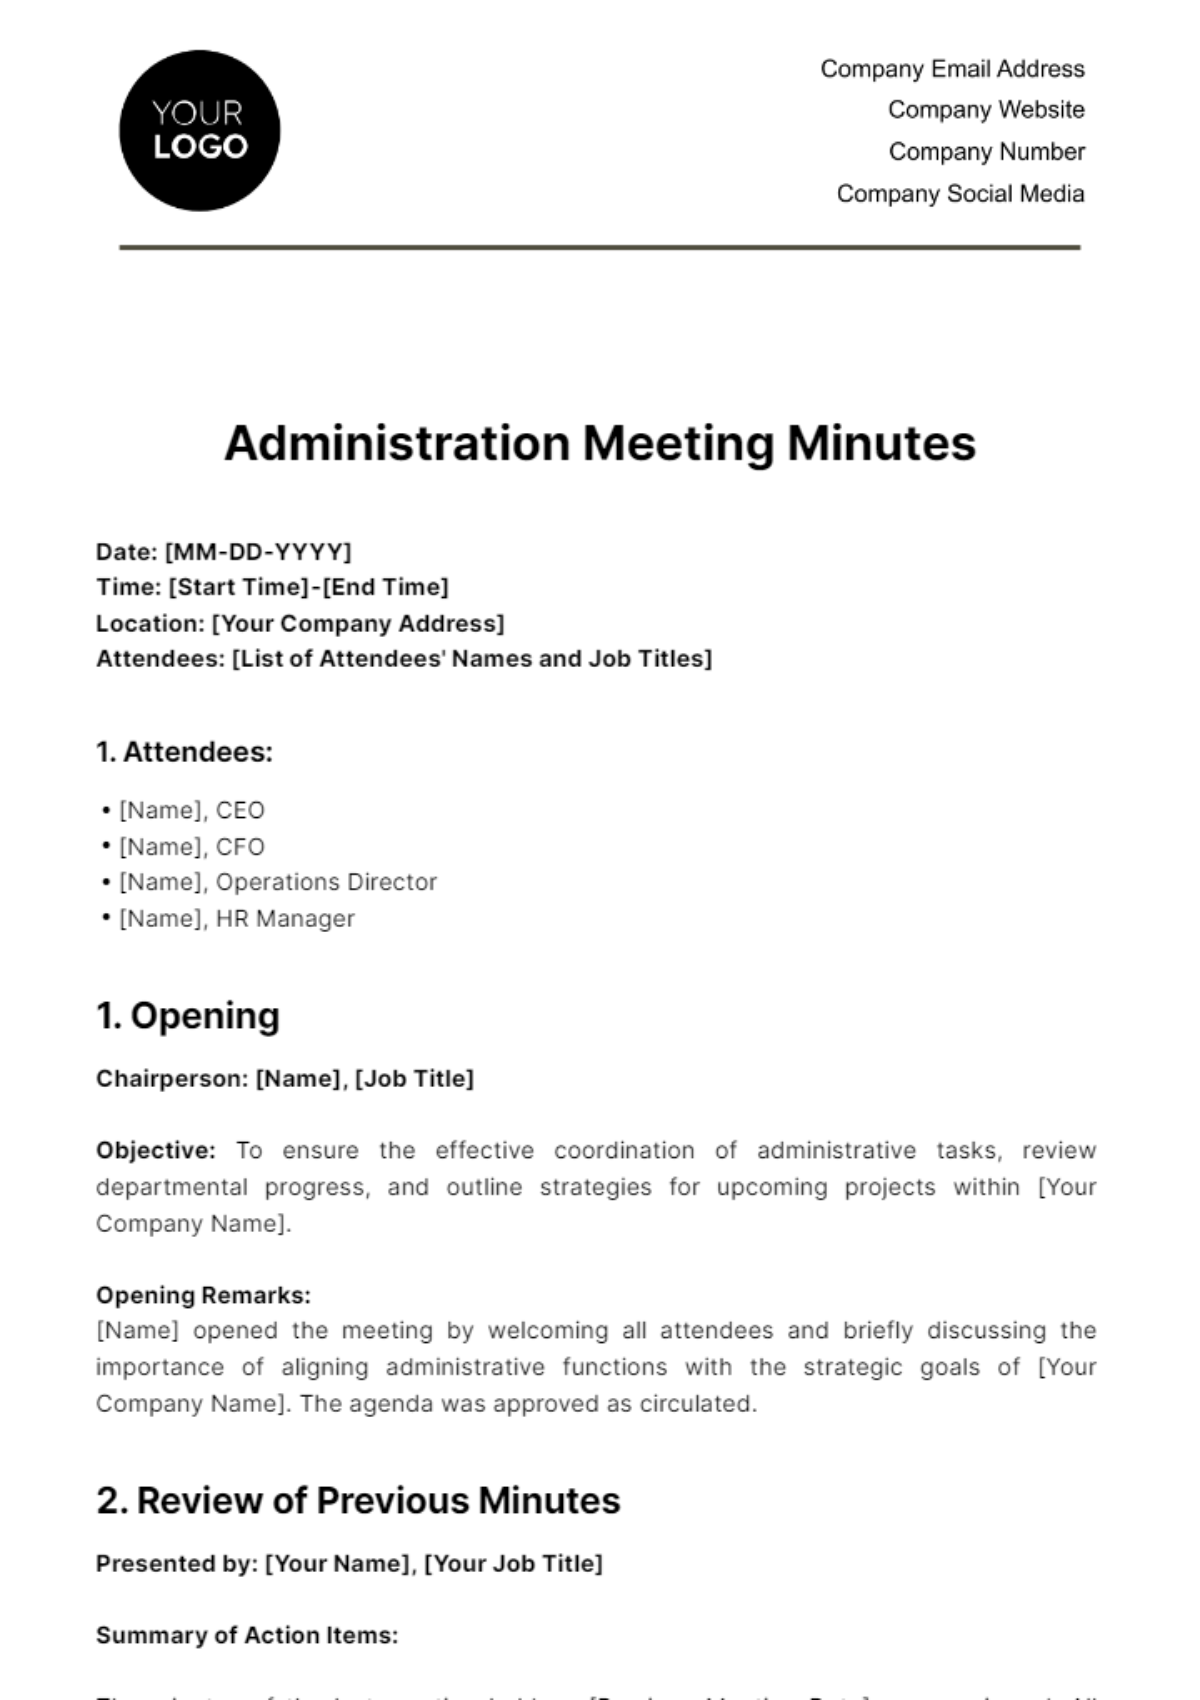 Free Administration Meeting Minutes Template